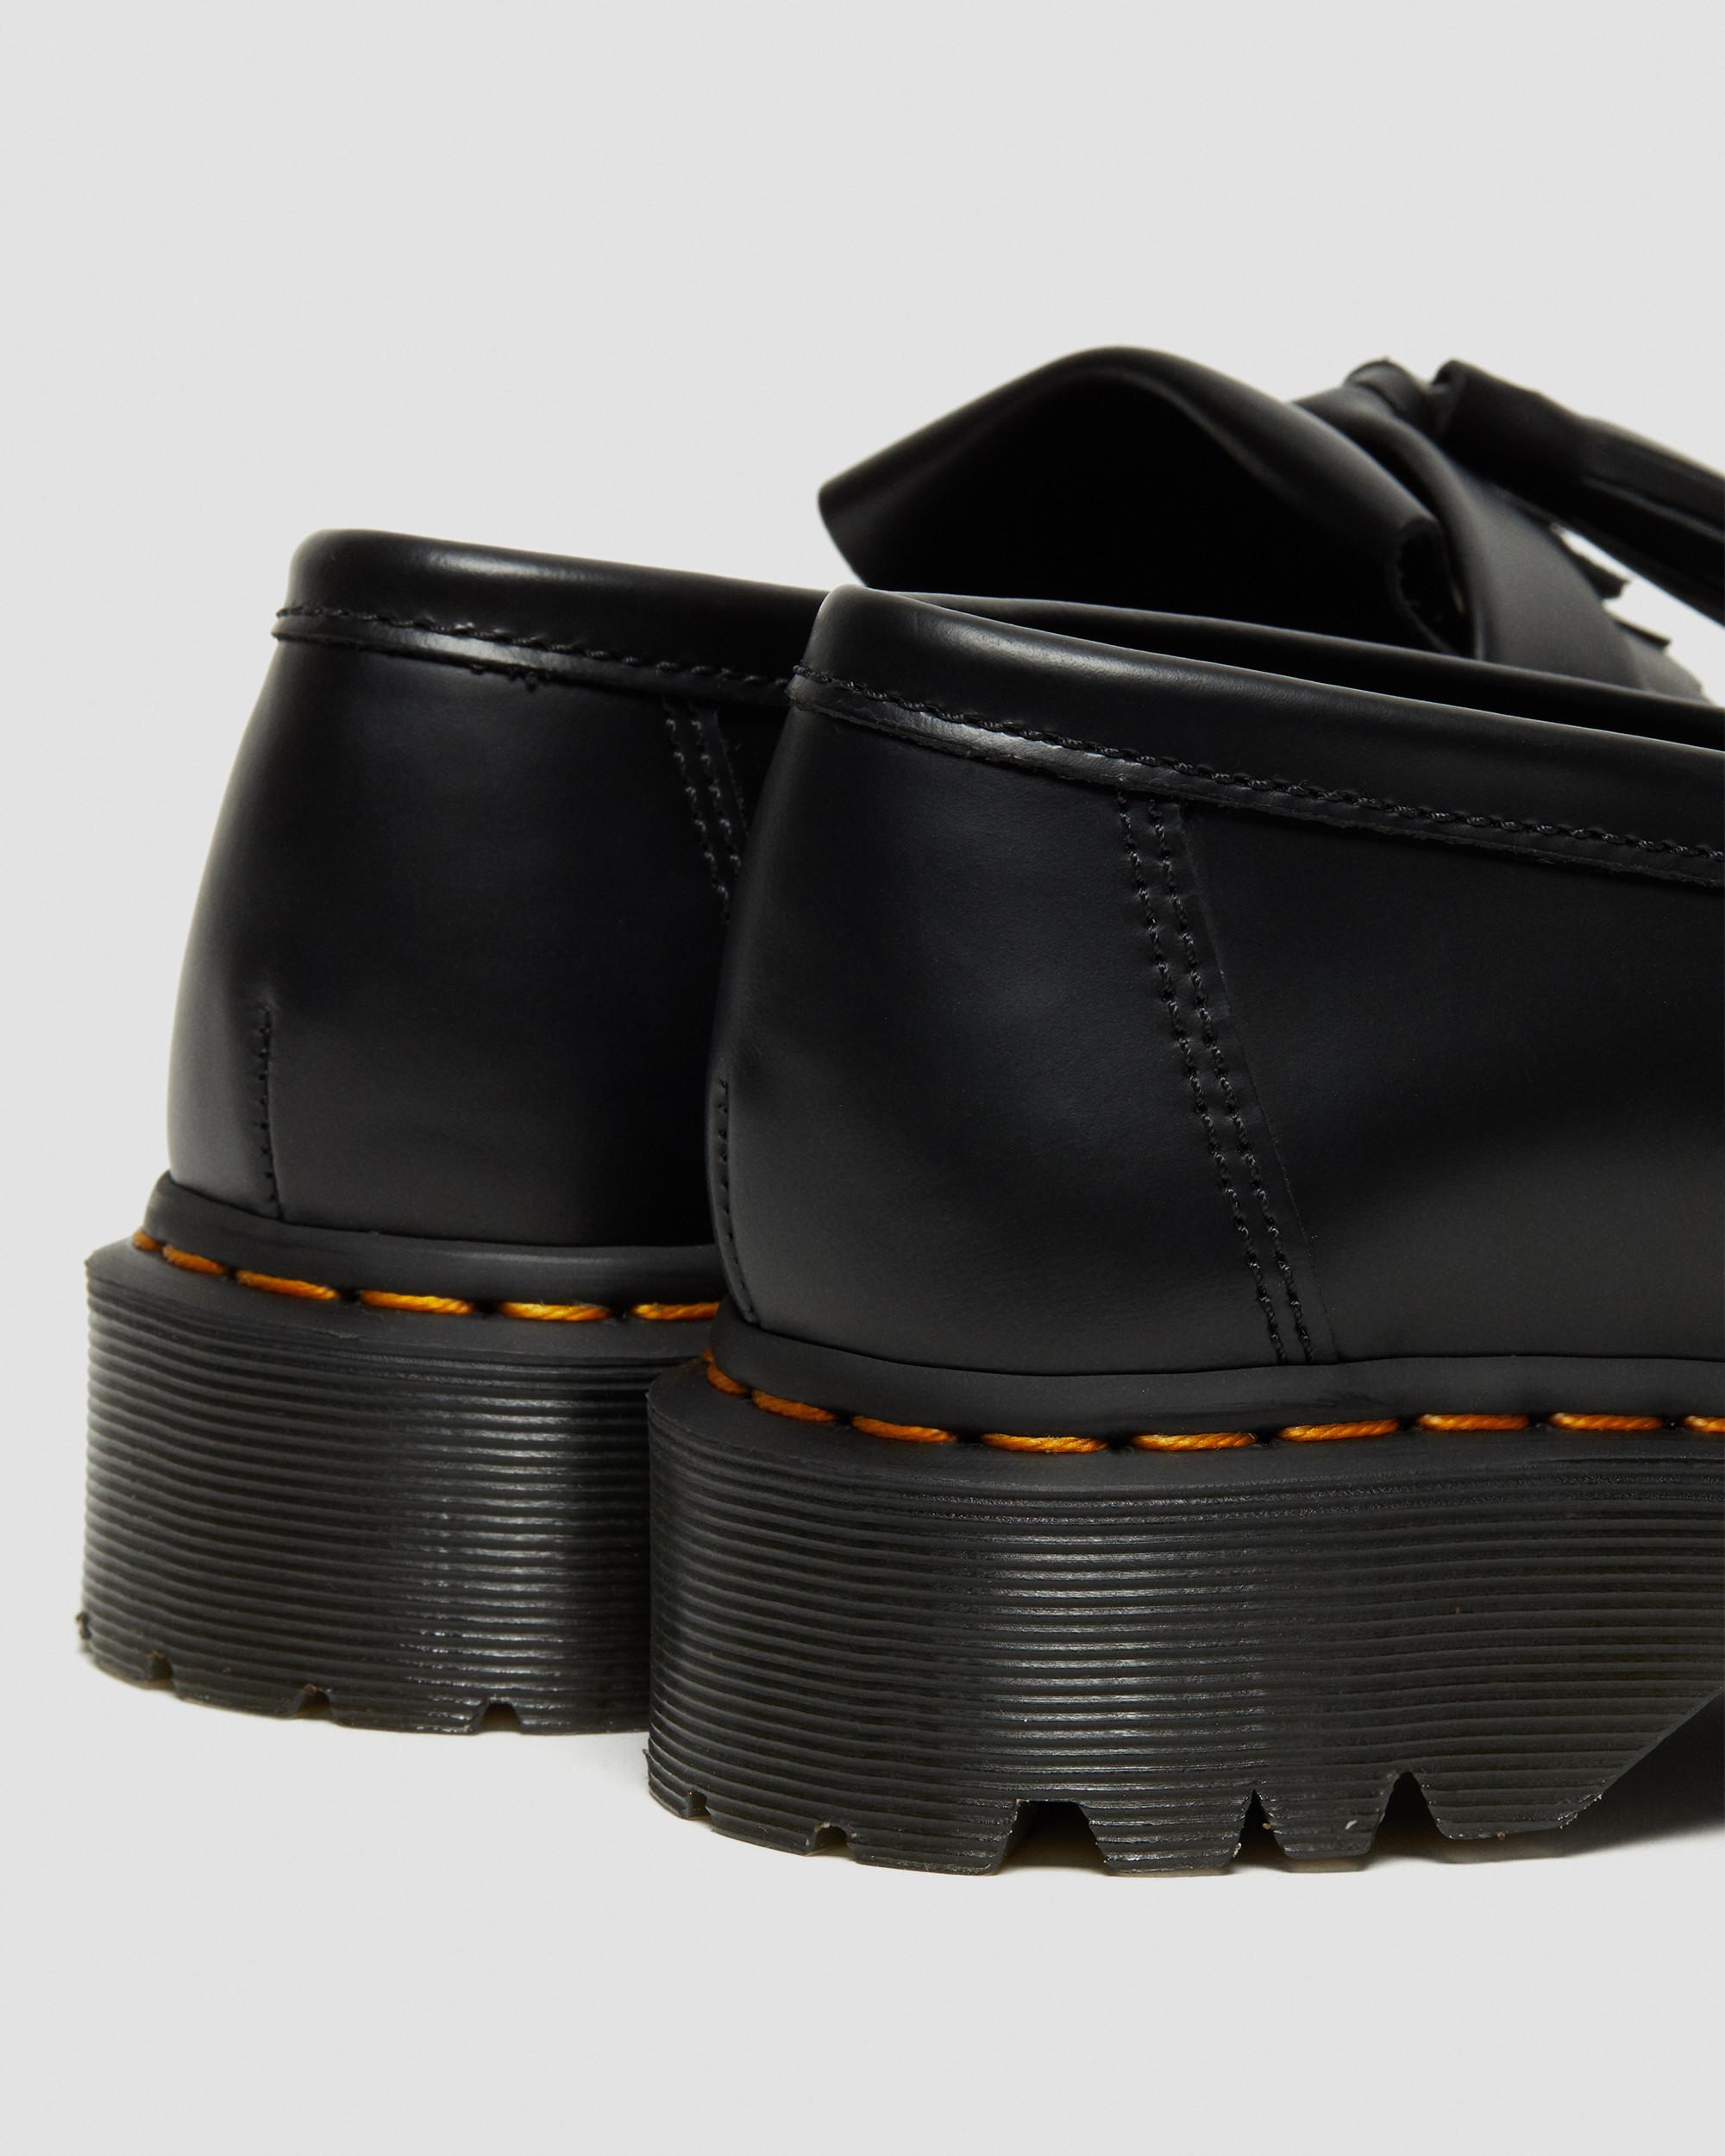 Adrian Bex Smooth Leather Tassel Loafers in Black | Dr. Martens